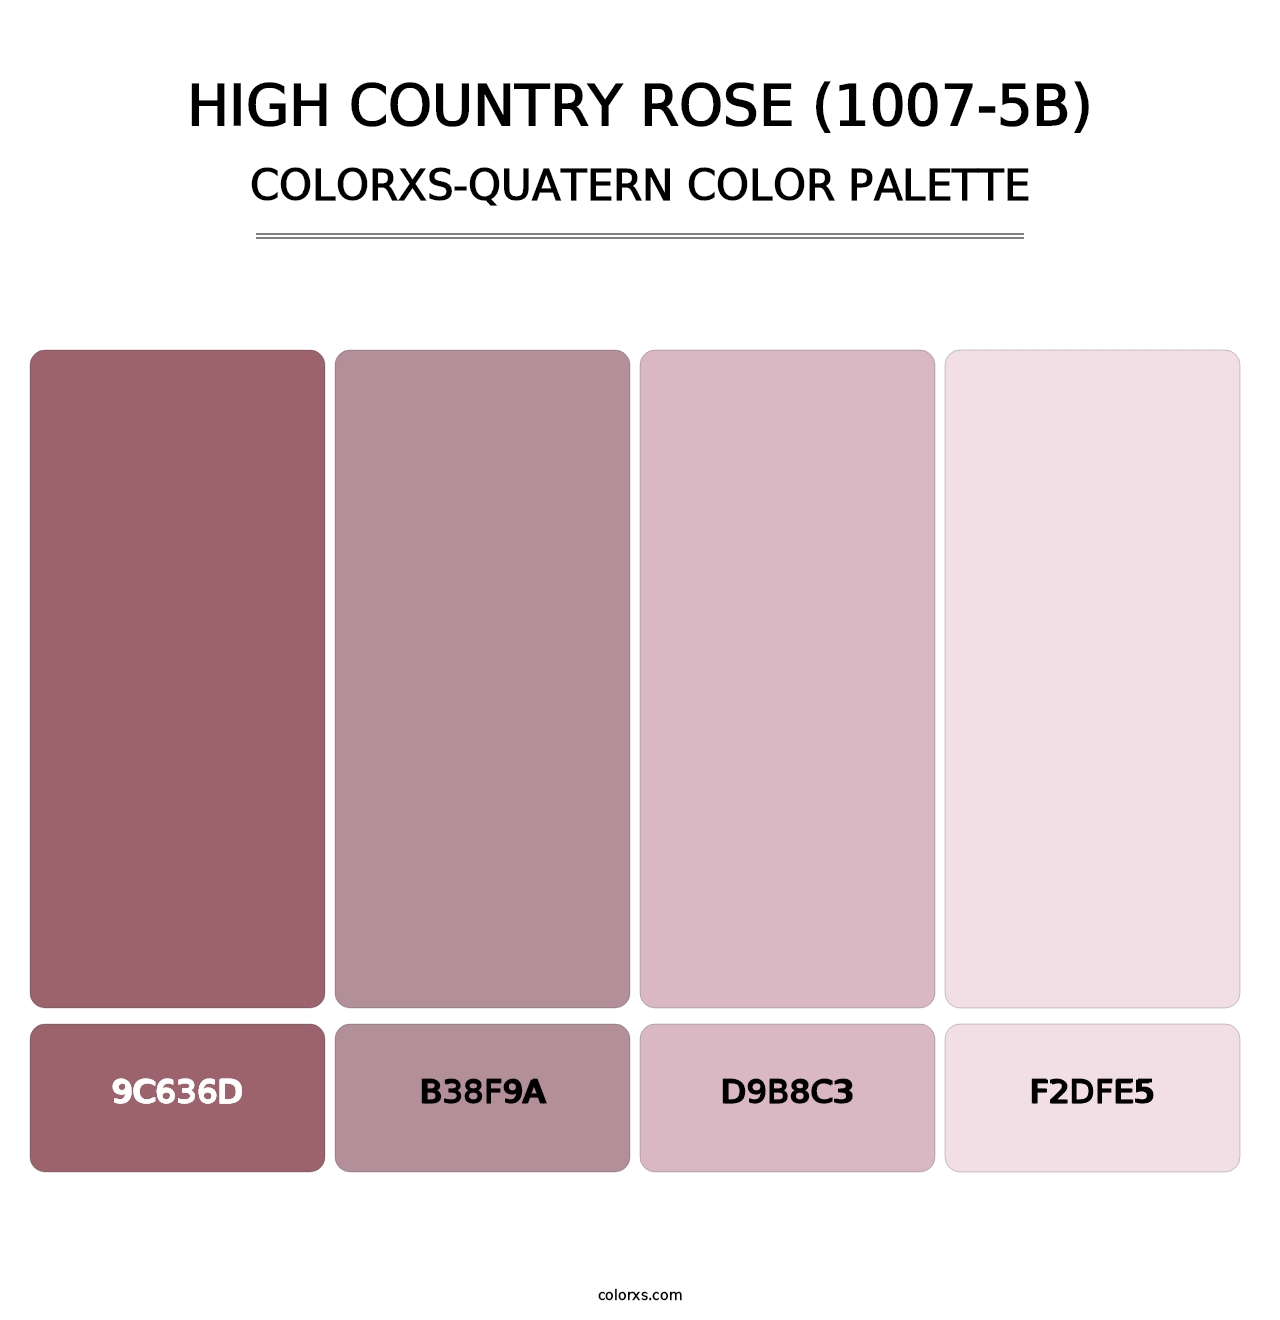 High Country Rose (1007-5B) - Colorxs Quatern Palette